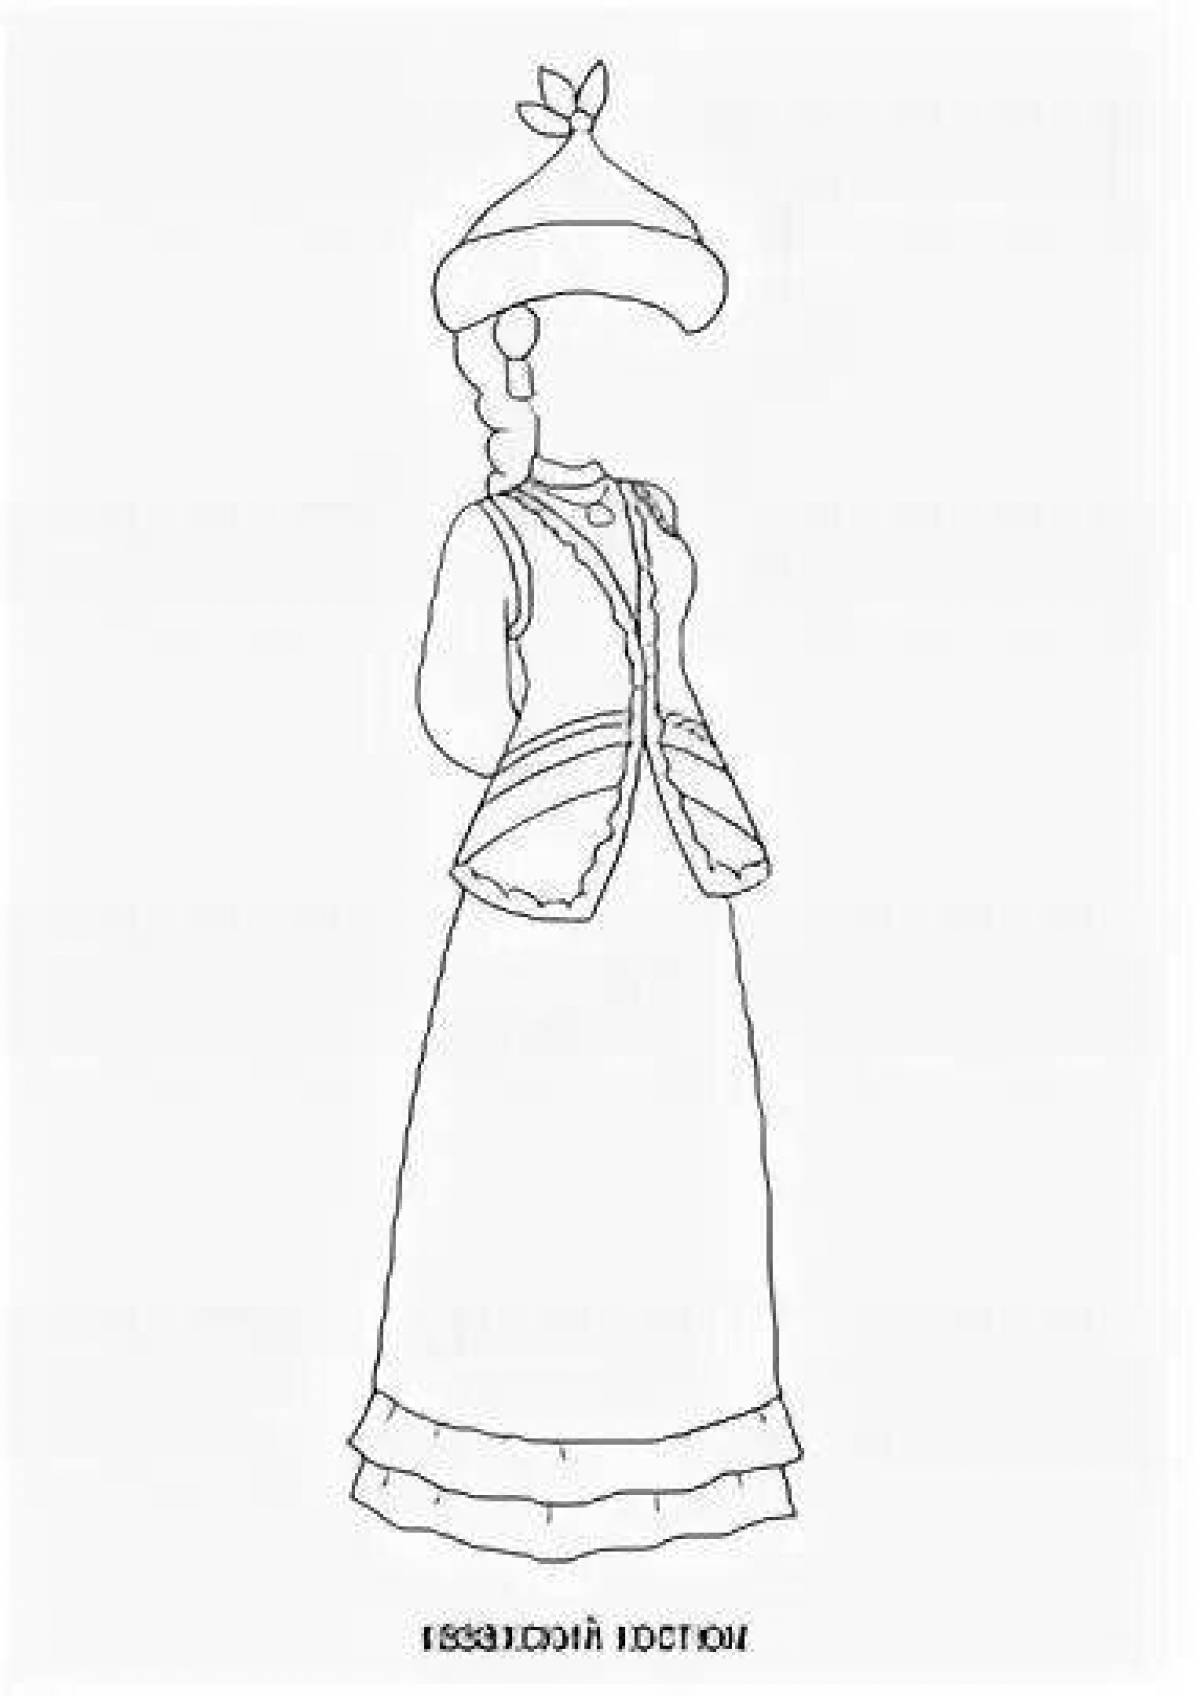 Coloring page of an impressive Kazakh national costume